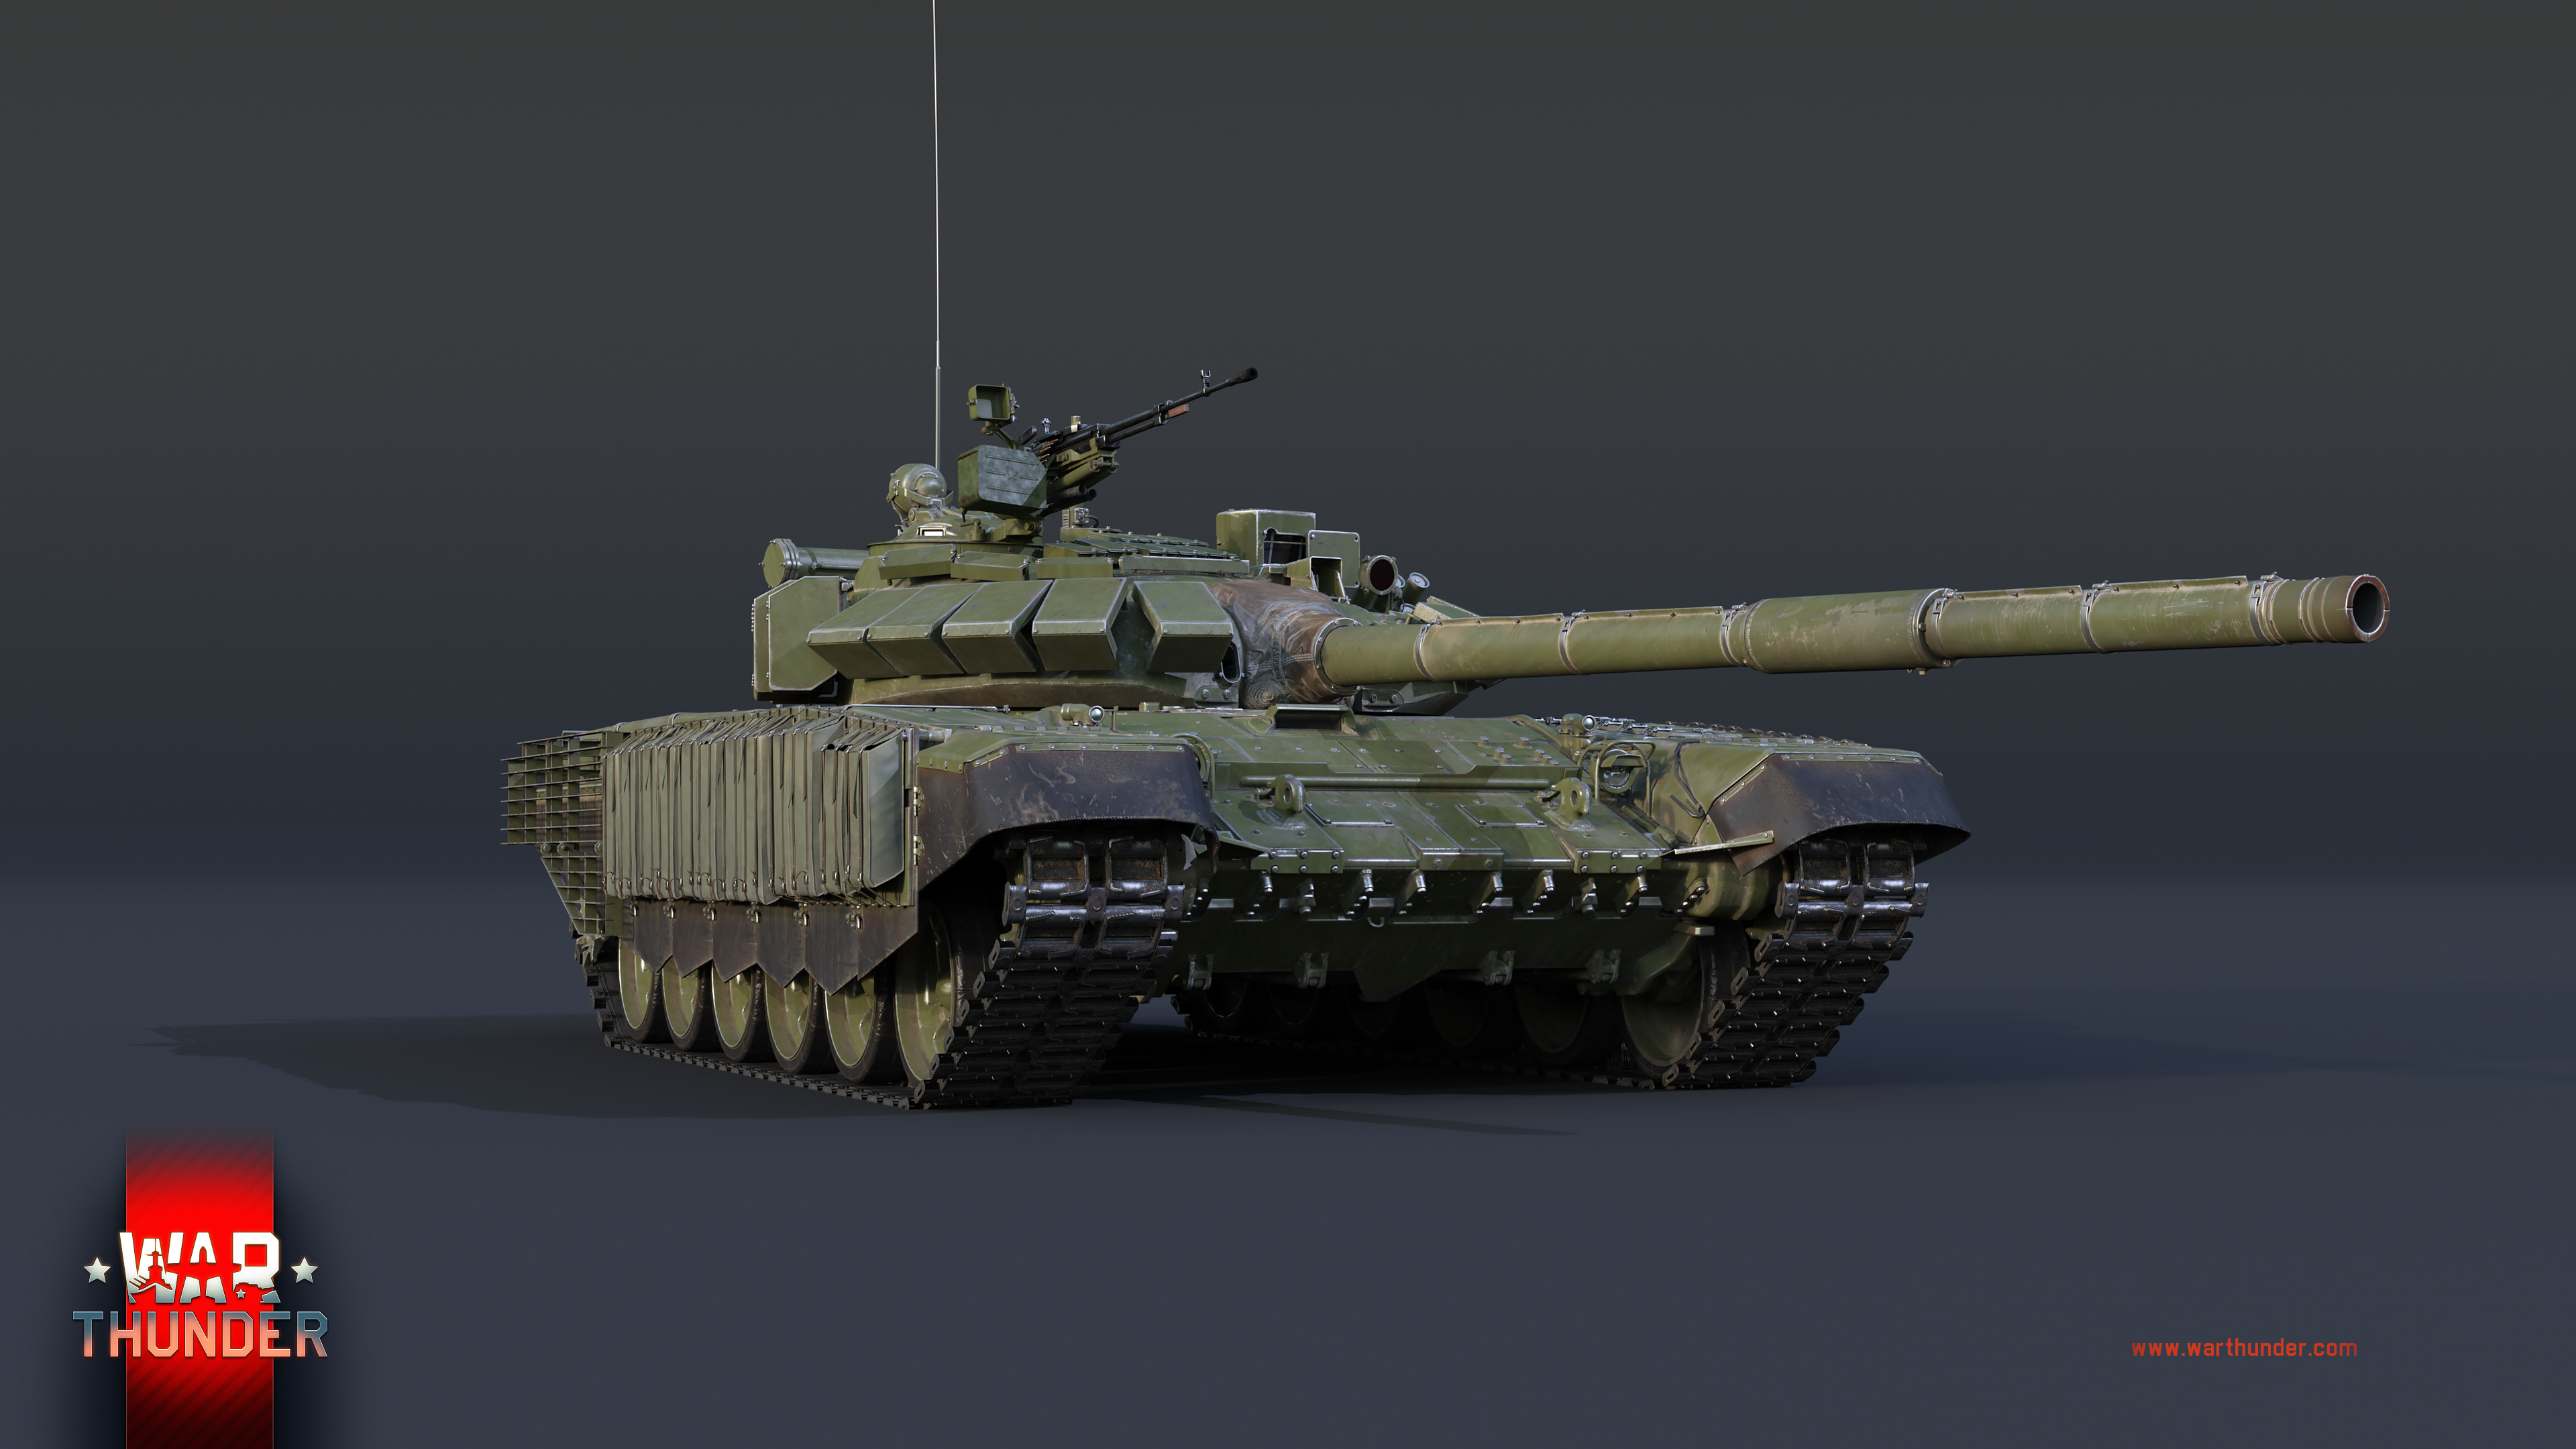 Development New T 72 Modifications Here Come The Top Of The Line Russians 6 Page News War Thunder